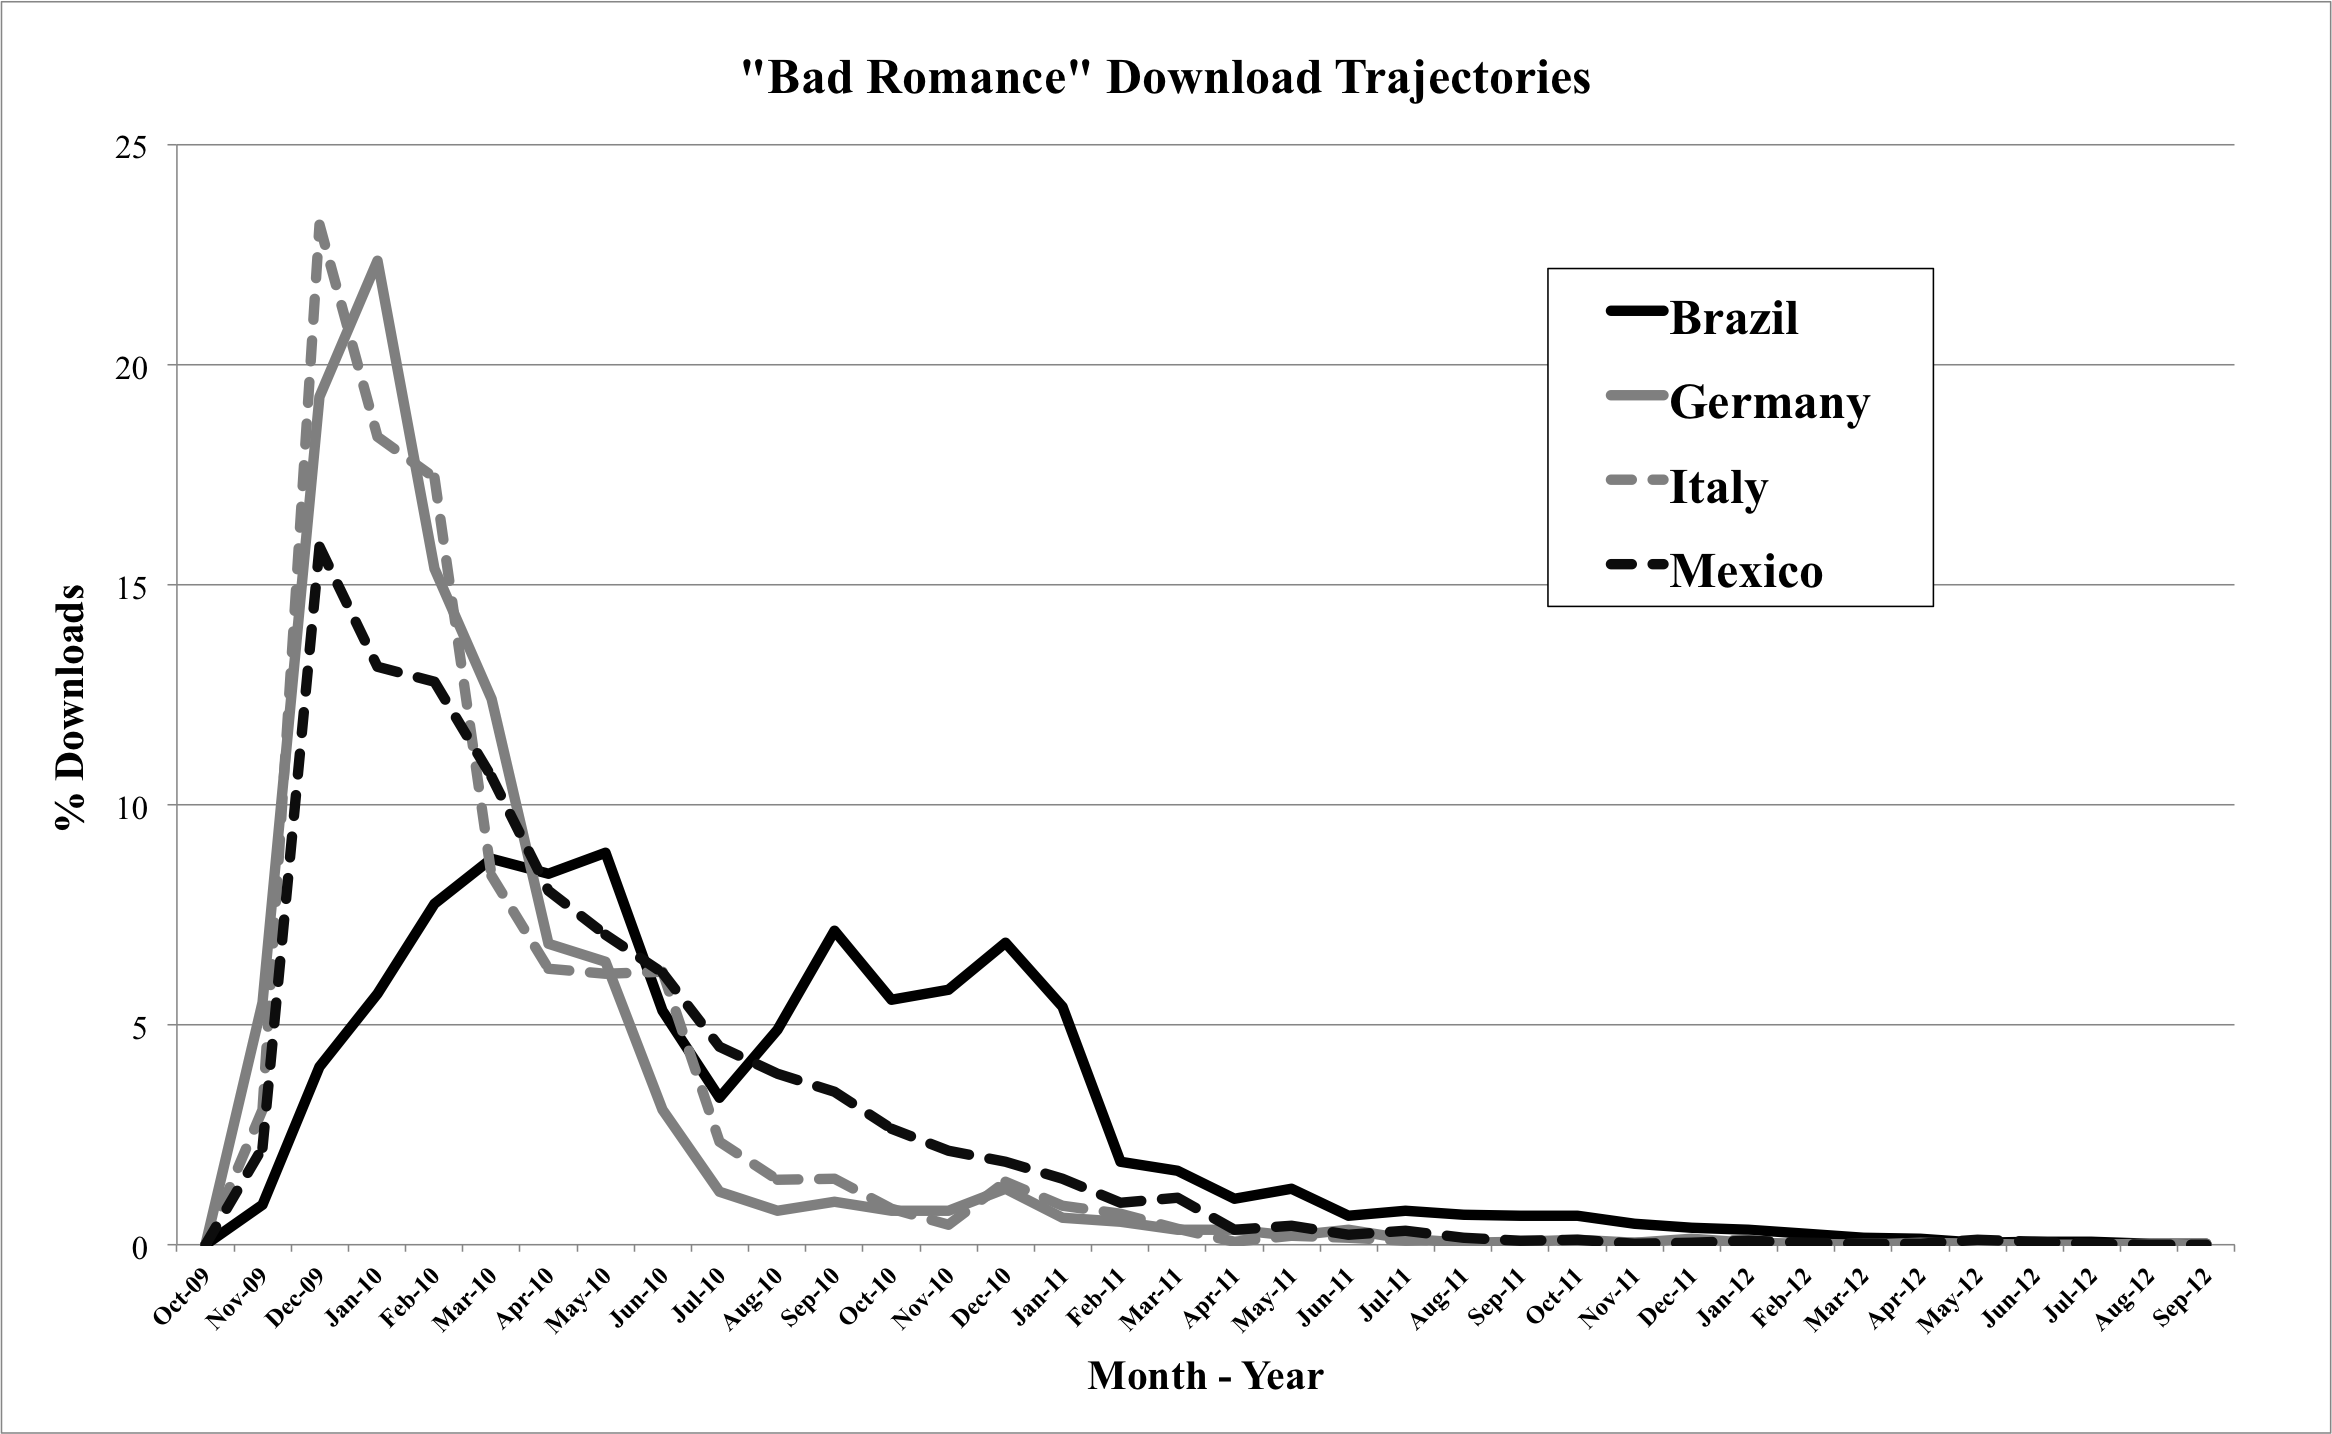 Download trajectories for “Bad Romance” by Lady Gaga in Brazil, Germany, Italy, and Mexico.